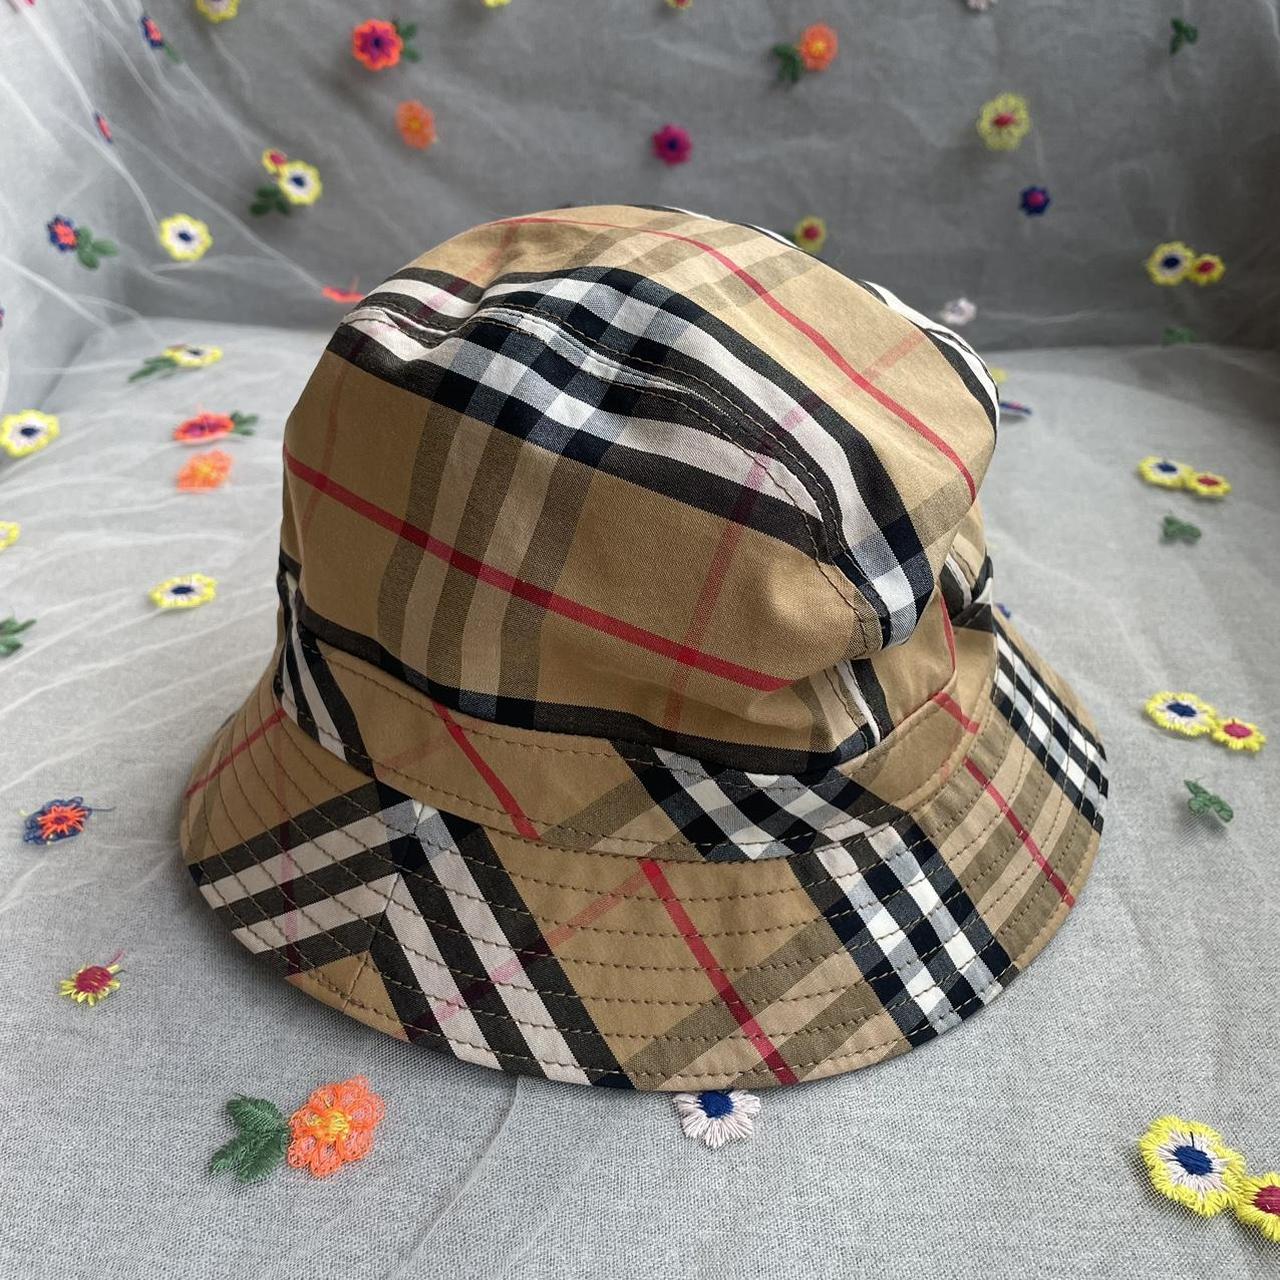 Burberry Brown Check Bucket Hat